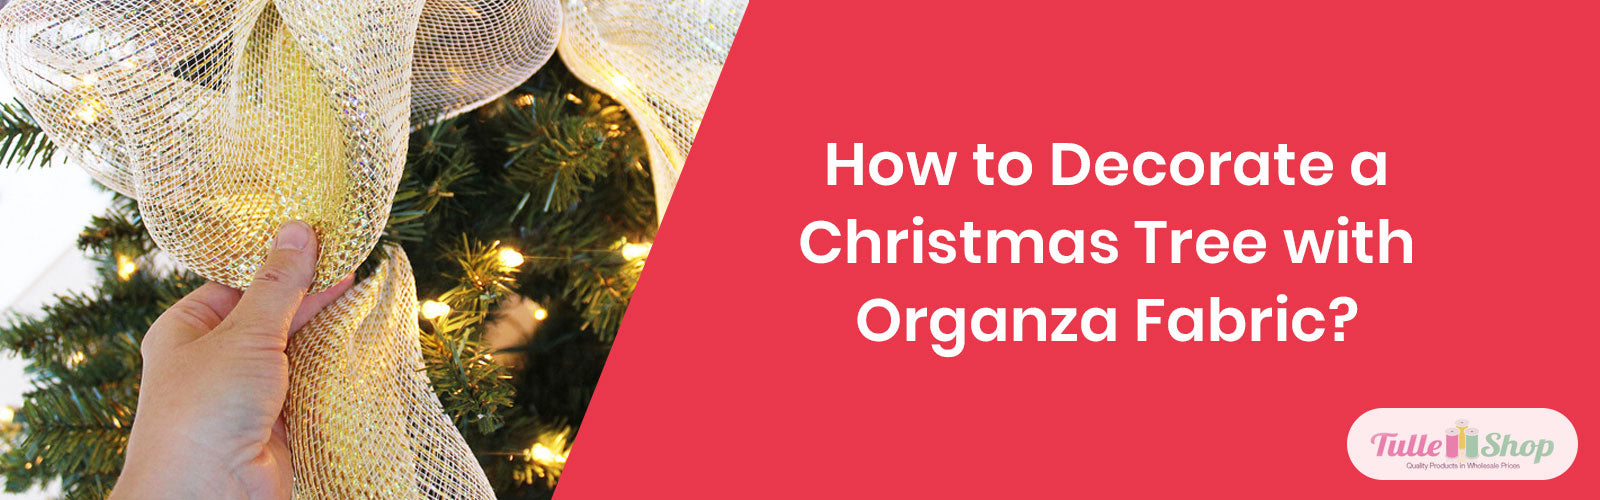 How to Decorate a Christmas Tree with Organza Fabric